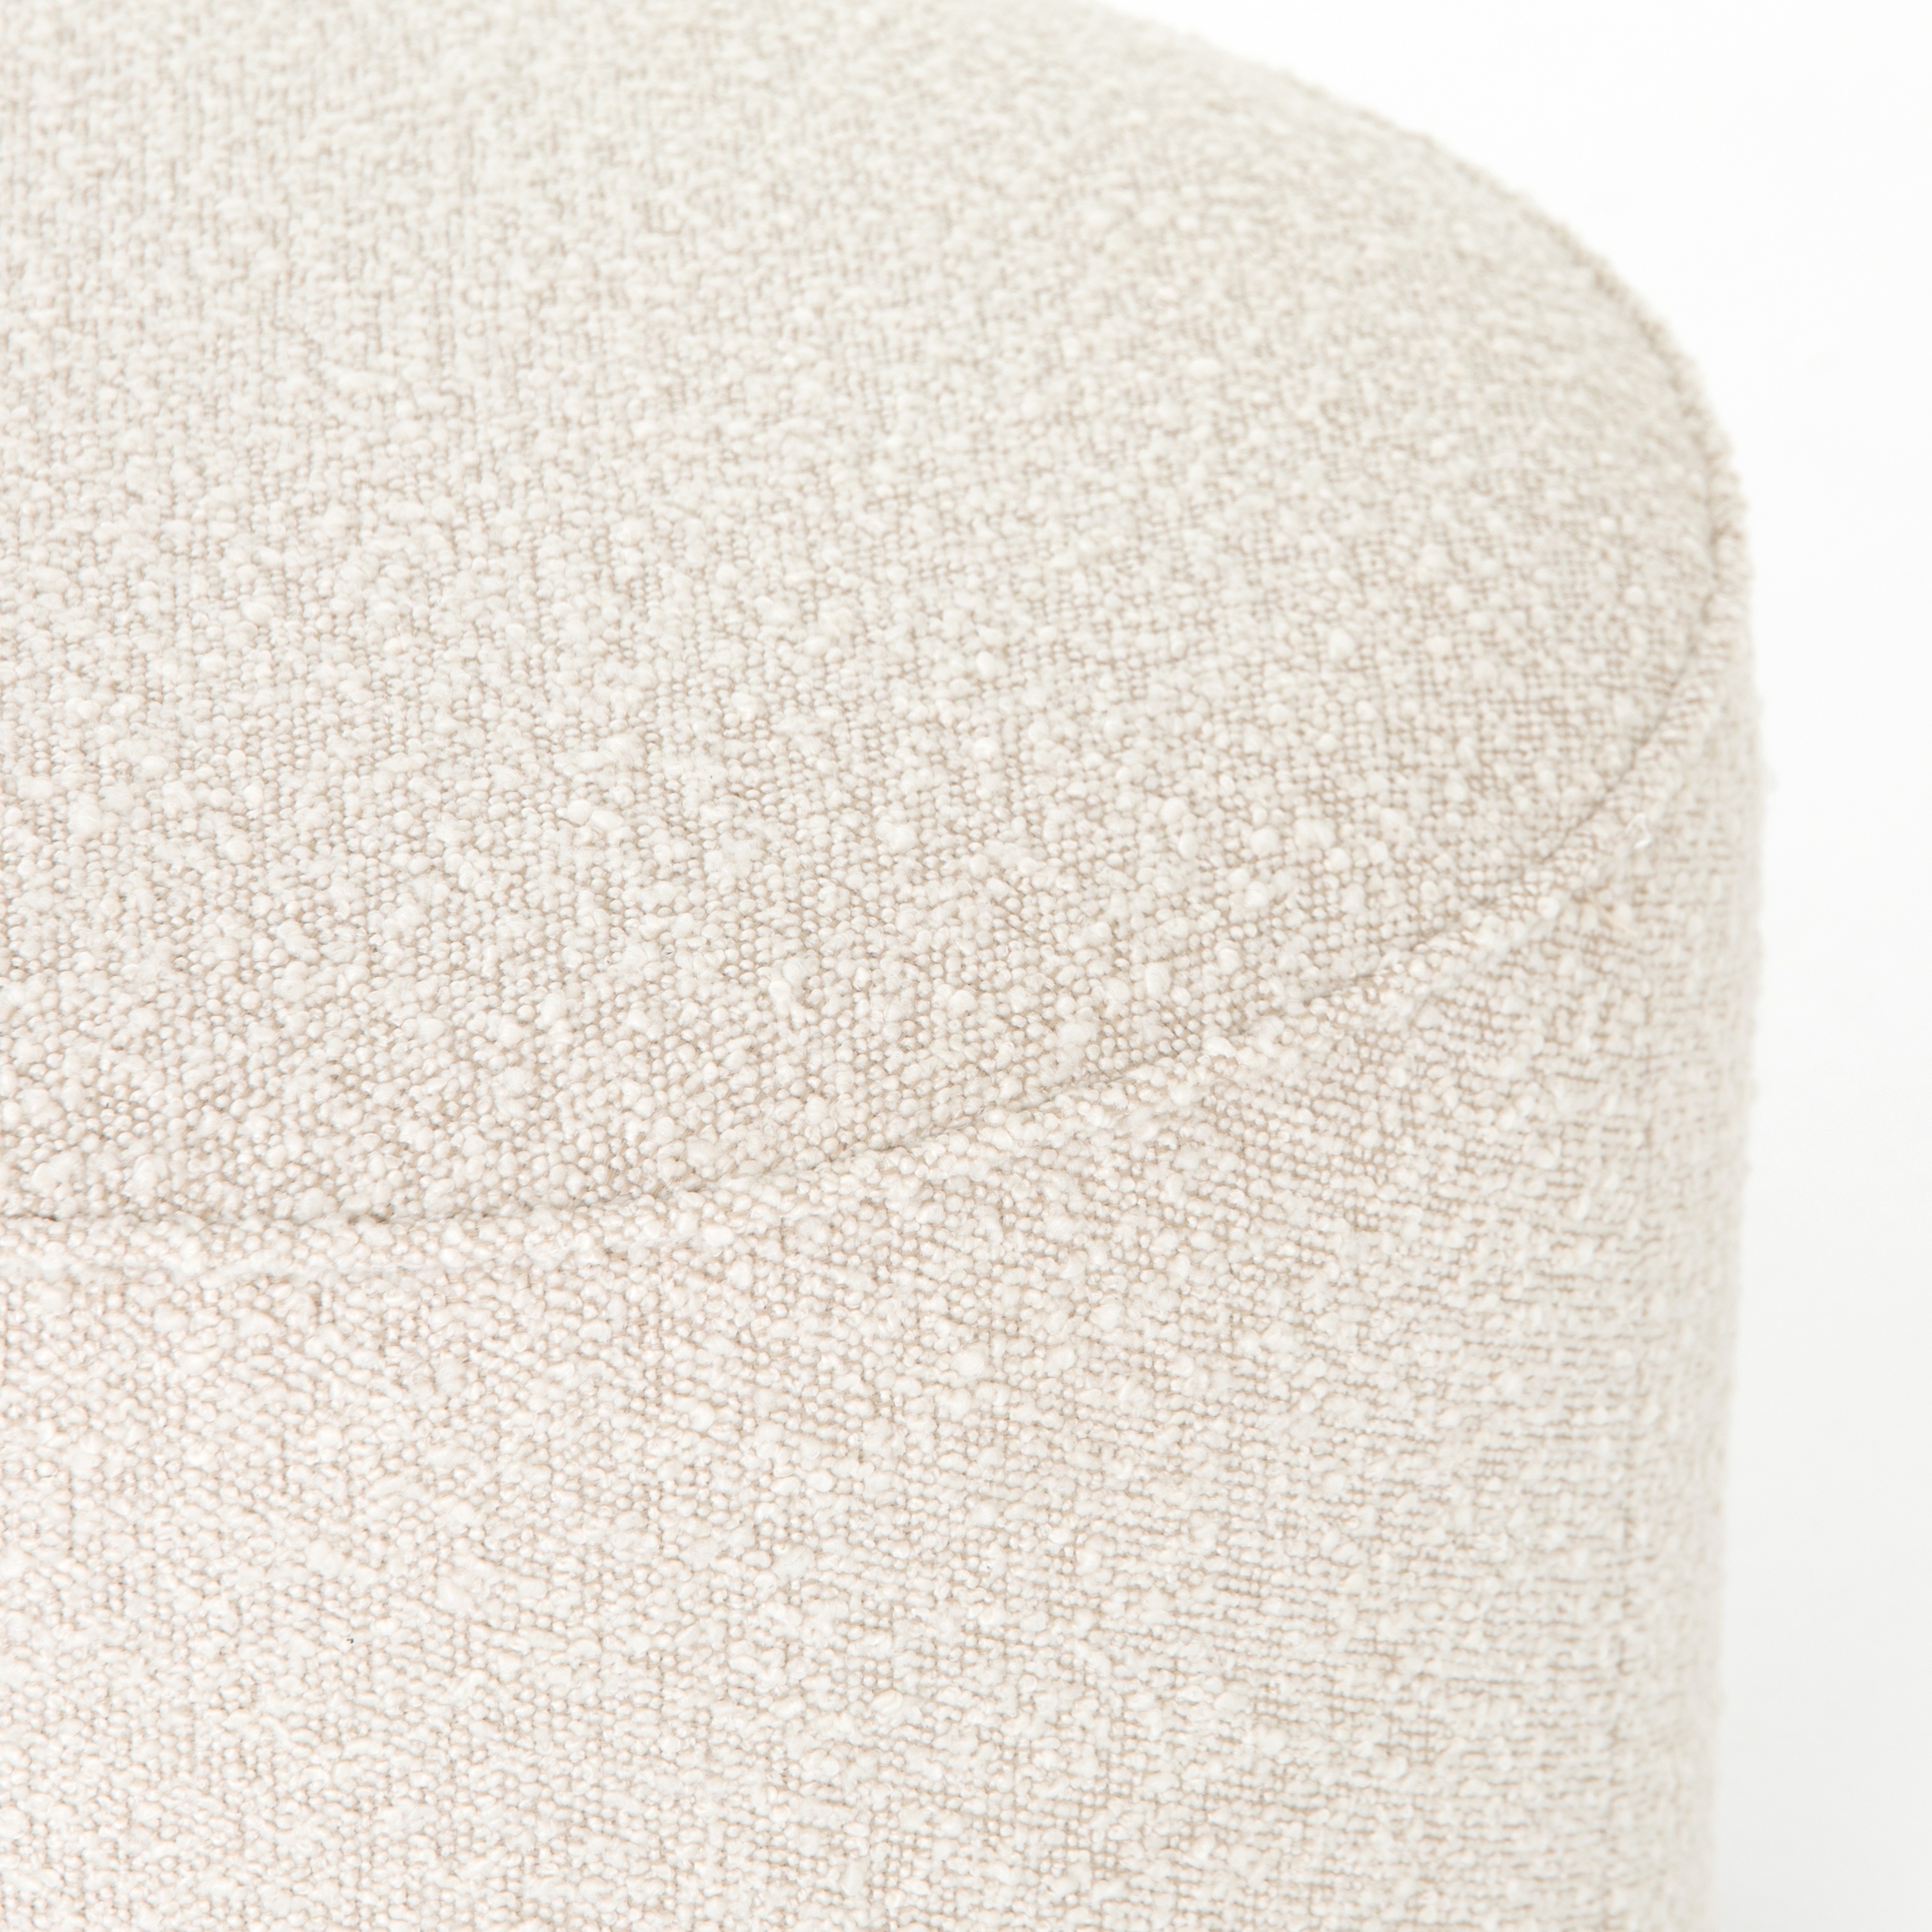 Sinclair Round Ottoman-Knoll Natural - Image 6